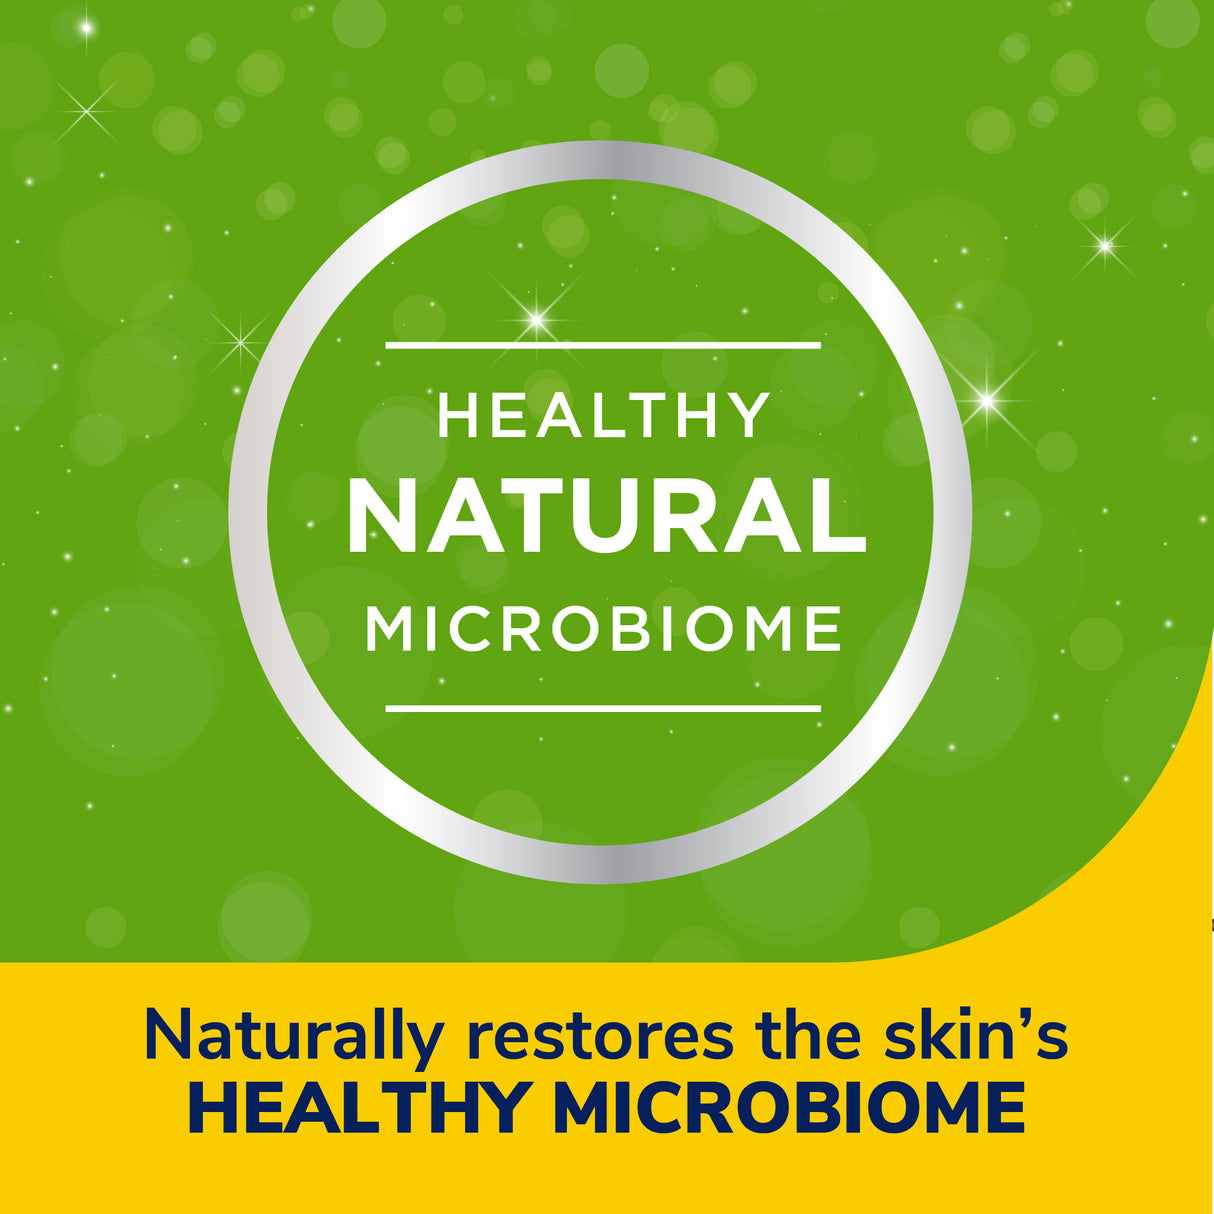 image of healthy natural microbiome